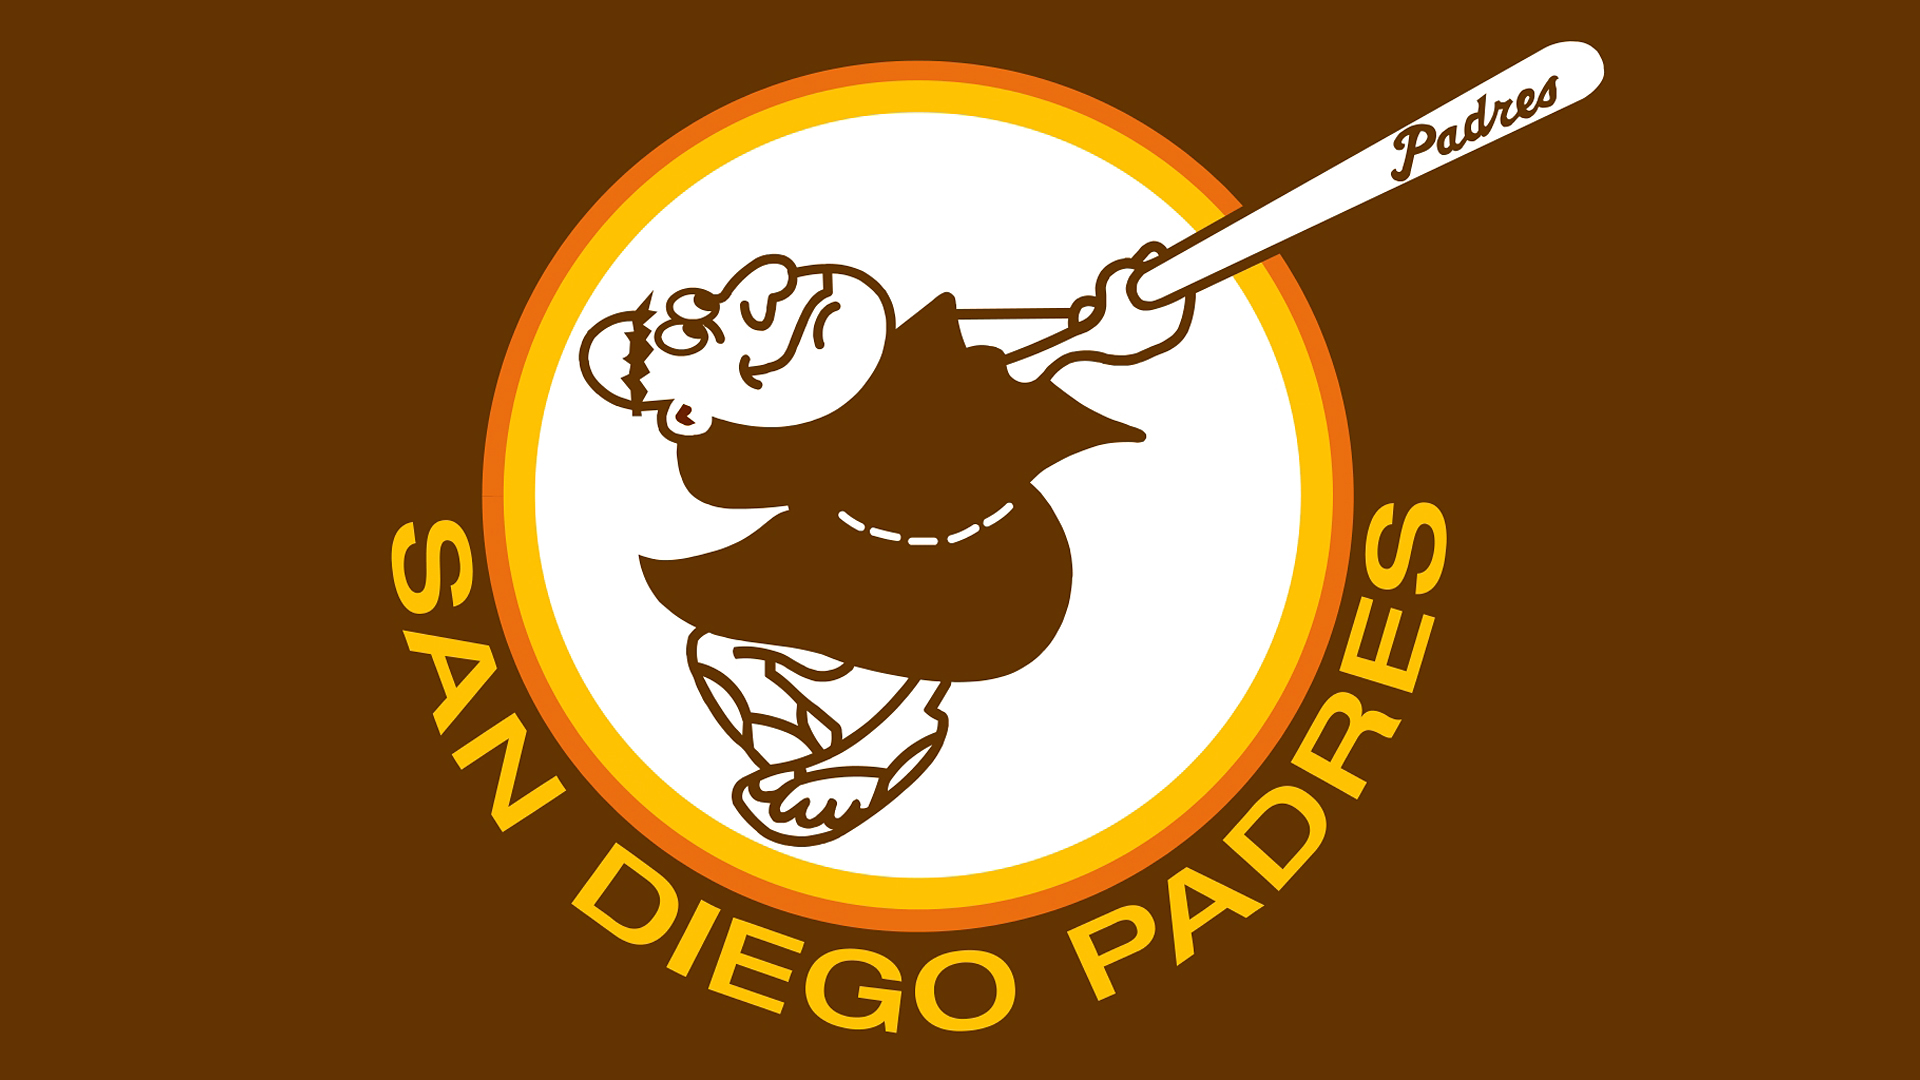 San Diego Padres Wallpaper Schedule for your lock screen